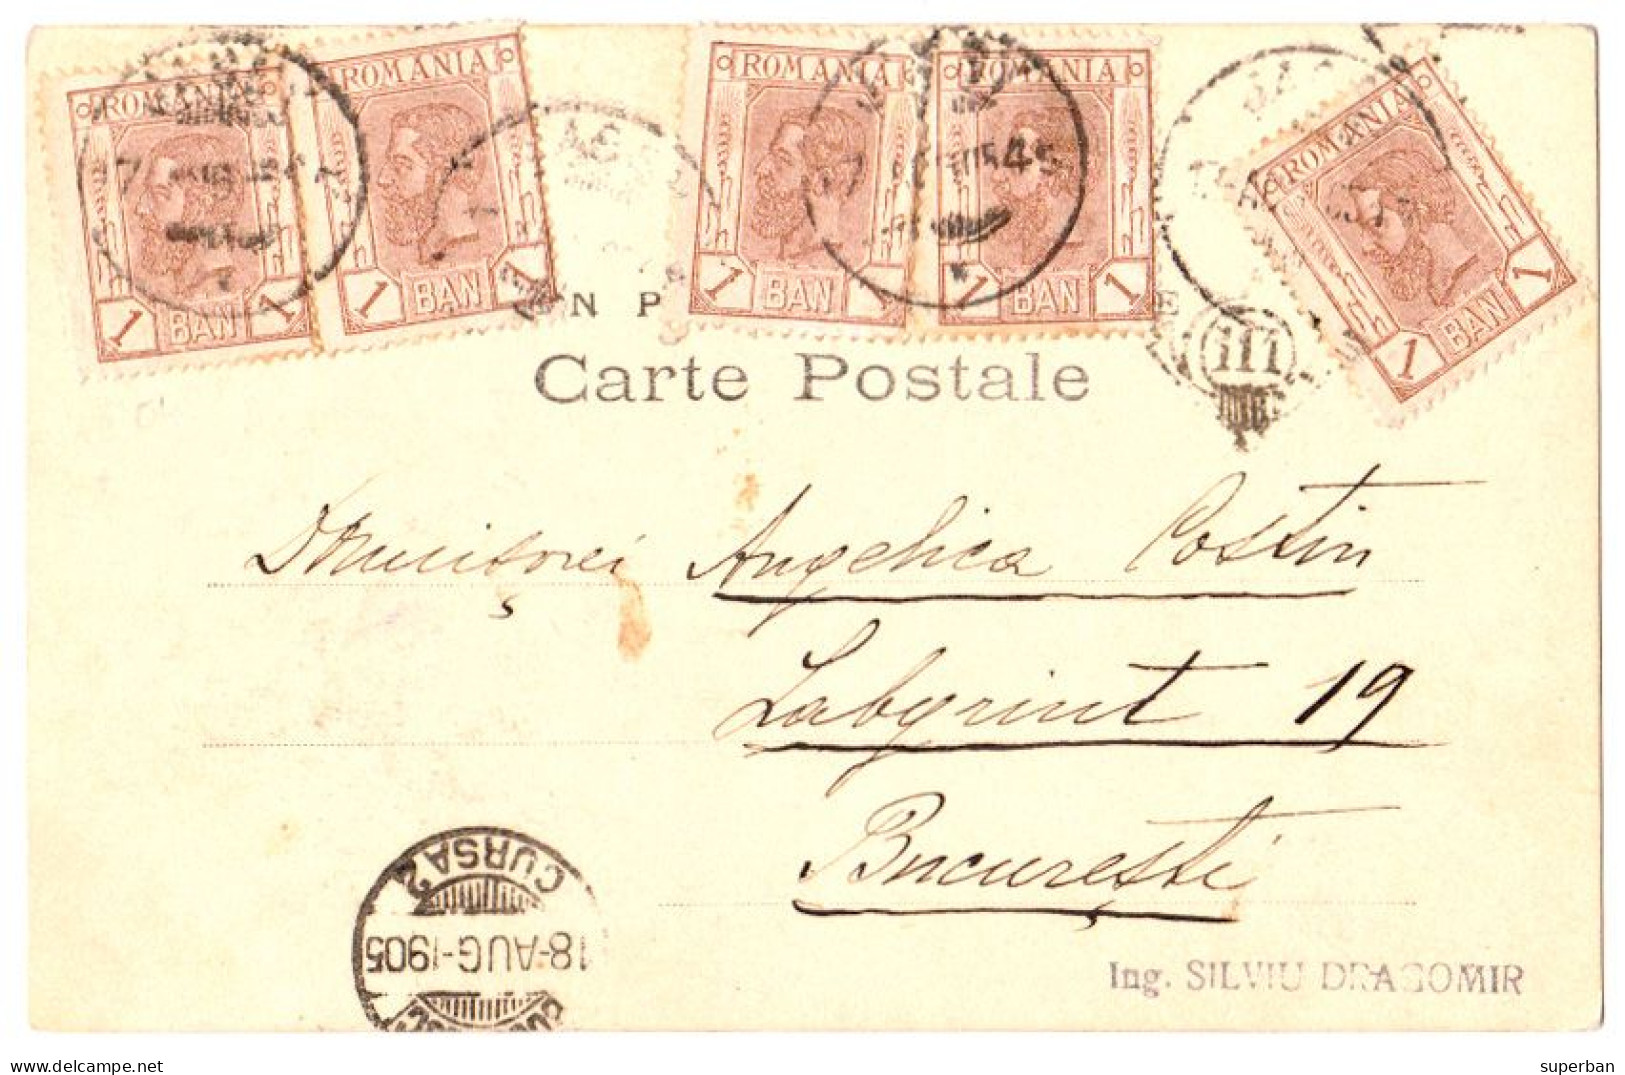 ROMANIA : IASI / JASSY - BEL AFFRANCHISSEMENT MUILTIPLE / NICE FRANKING POSTAGE : 5 TIMBRES / 5 STAMPS - 1905 (an336) - Cartas & Documentos